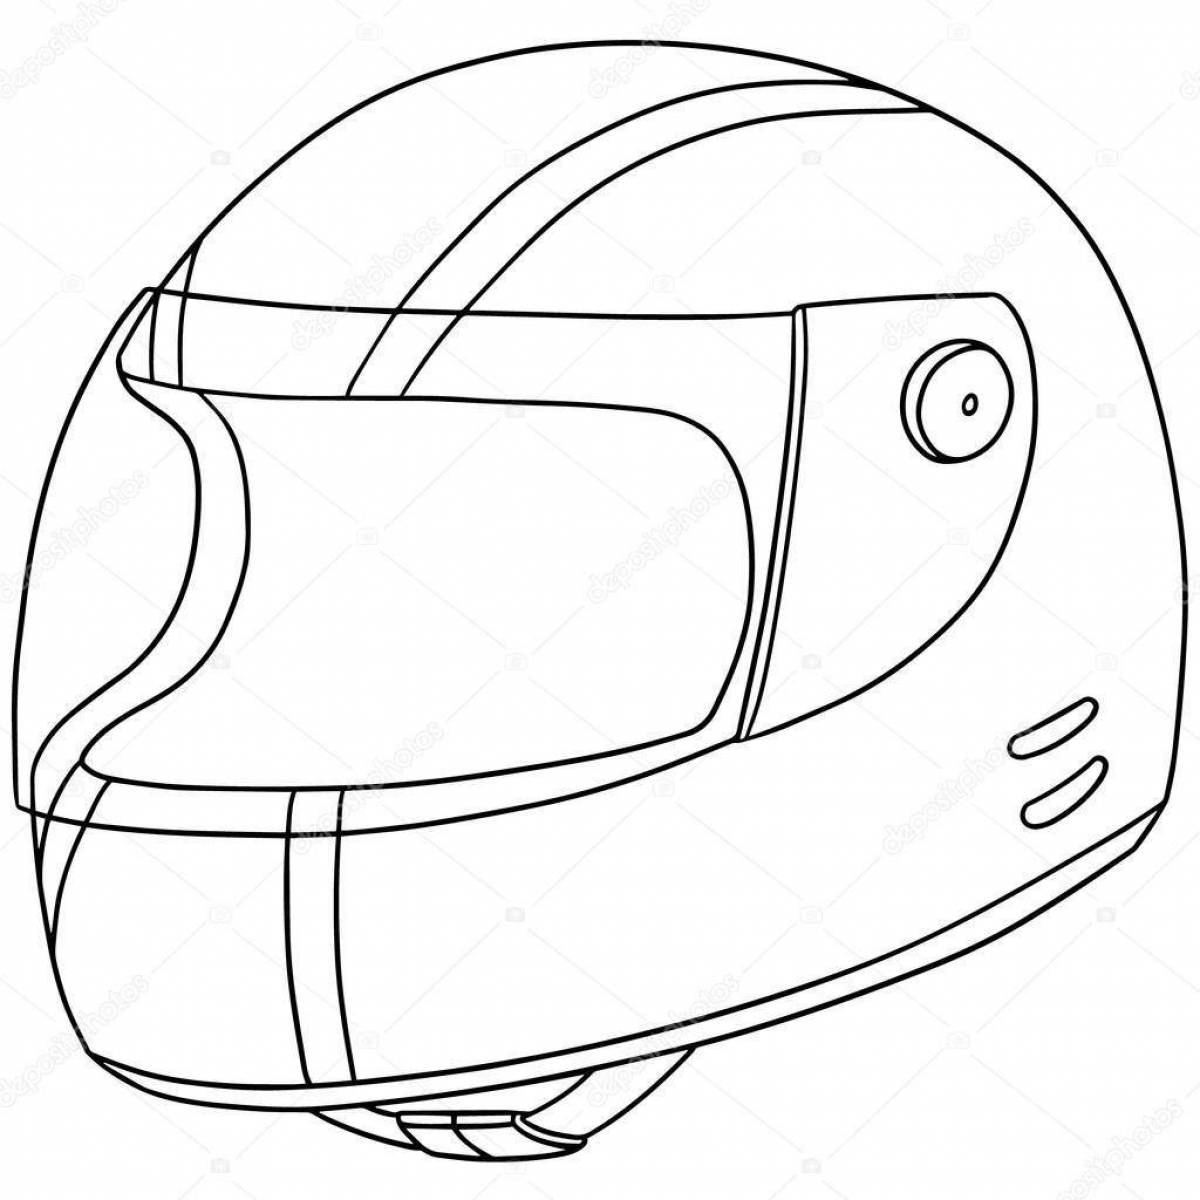 Colouring bright motorcycle helmet